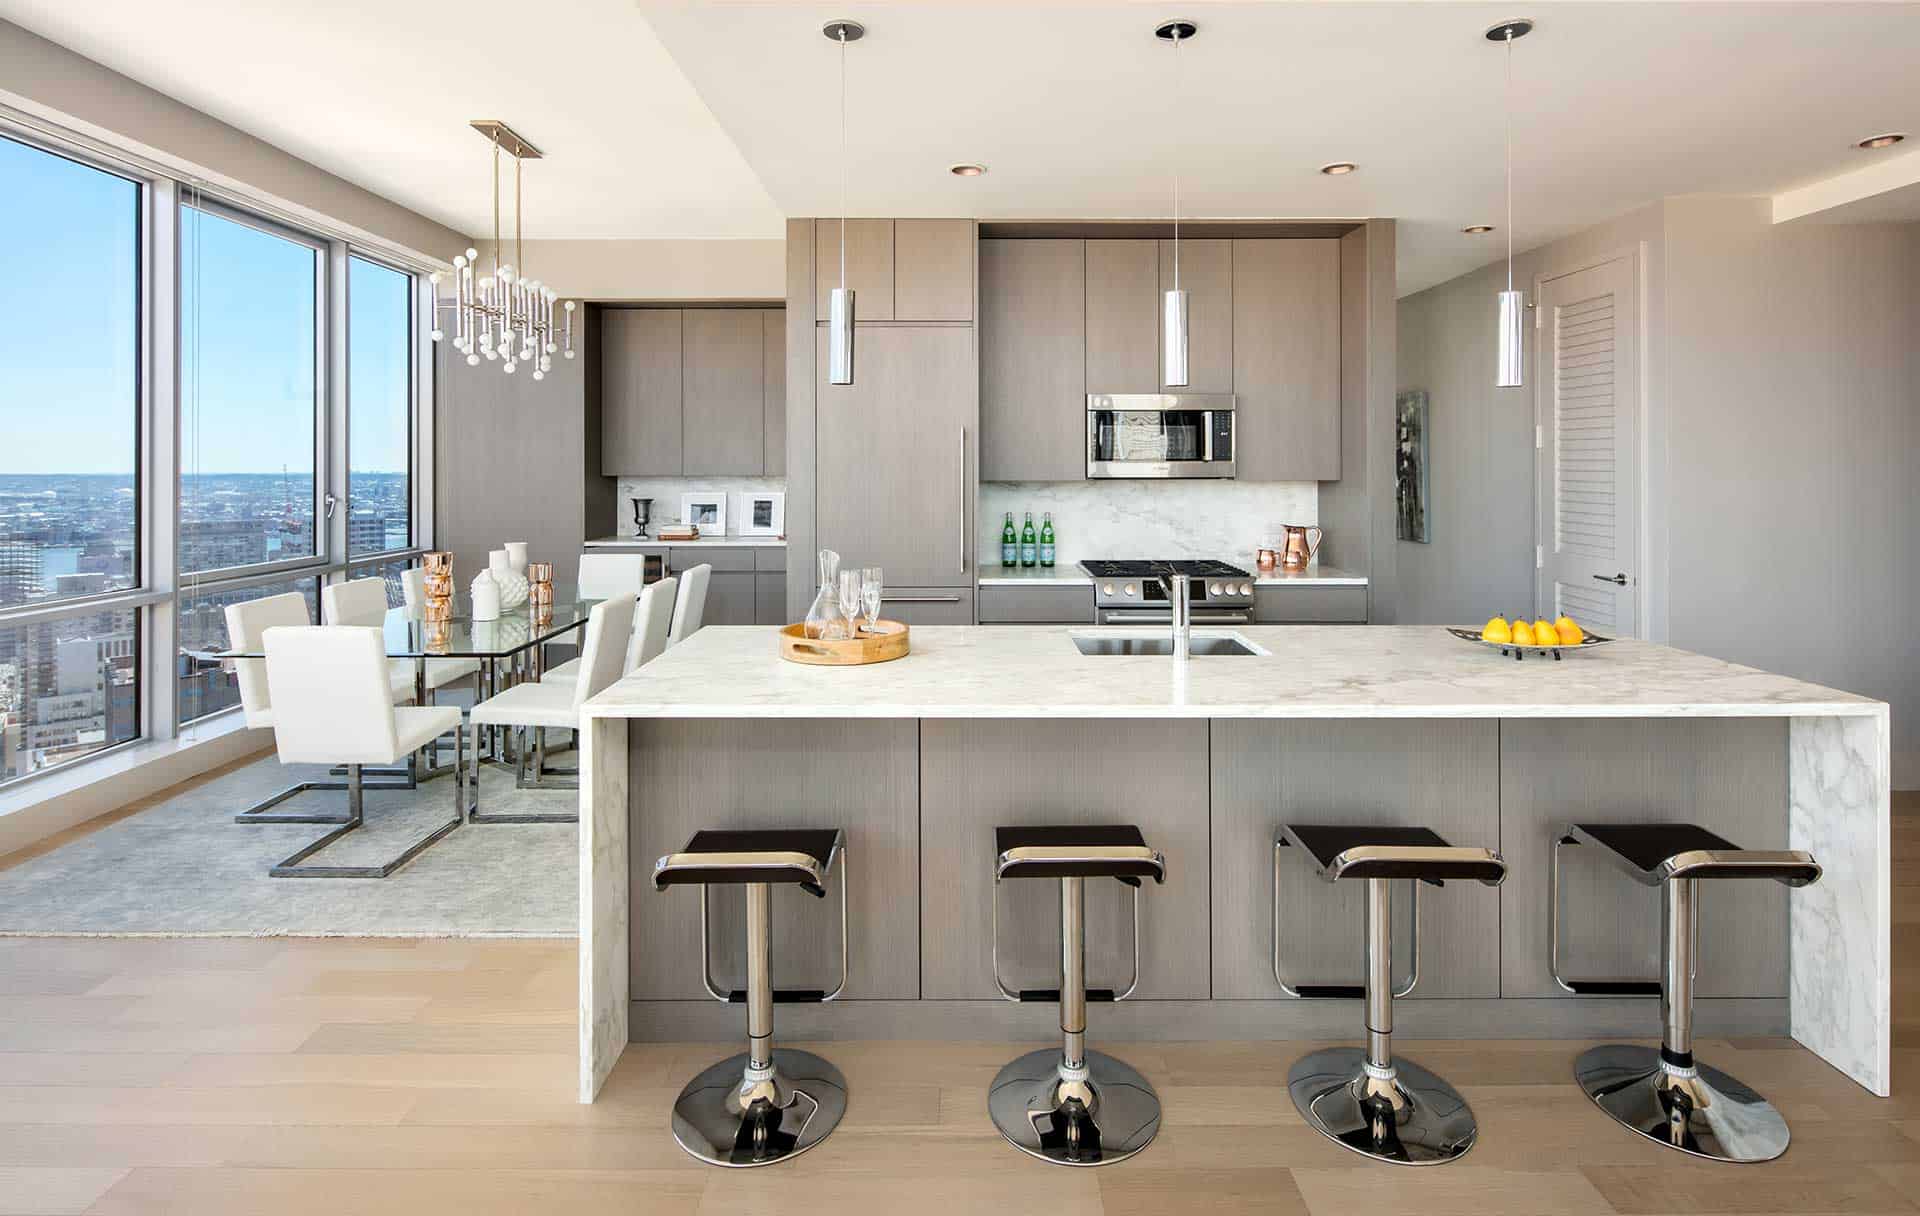 Modern luxury penthouse kitchen features Bilotta cabinetry, with washed finish and island with marble waterfall countertop.